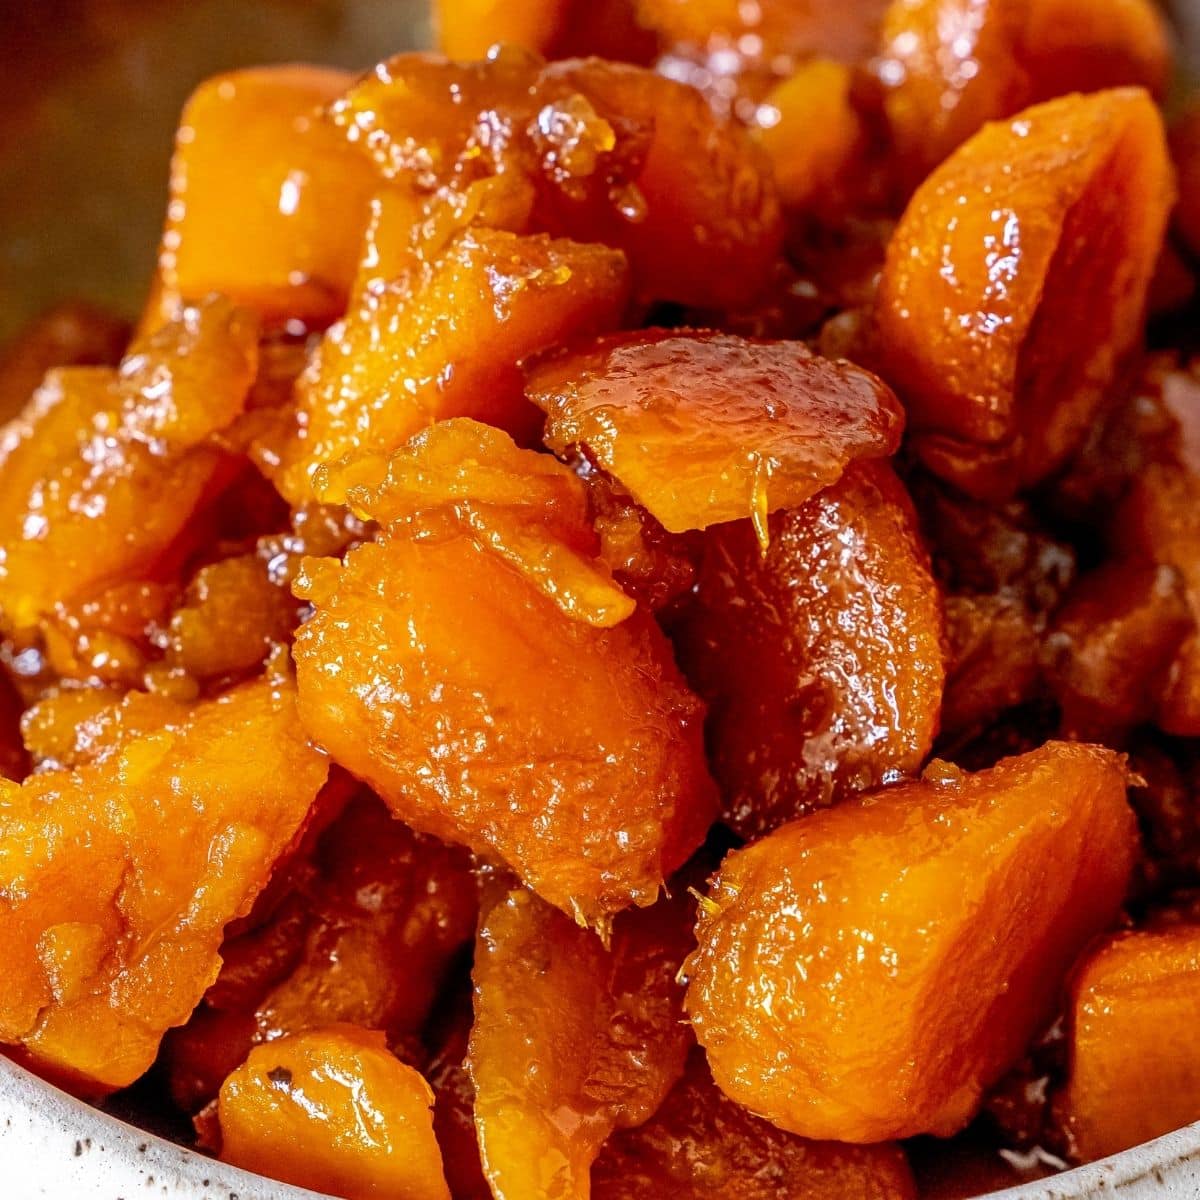 https://sweetcsdesigns.com/wp-content/uploads/2021/11/Easy-Candied-Yams-Recipe-Picture-1.jpg